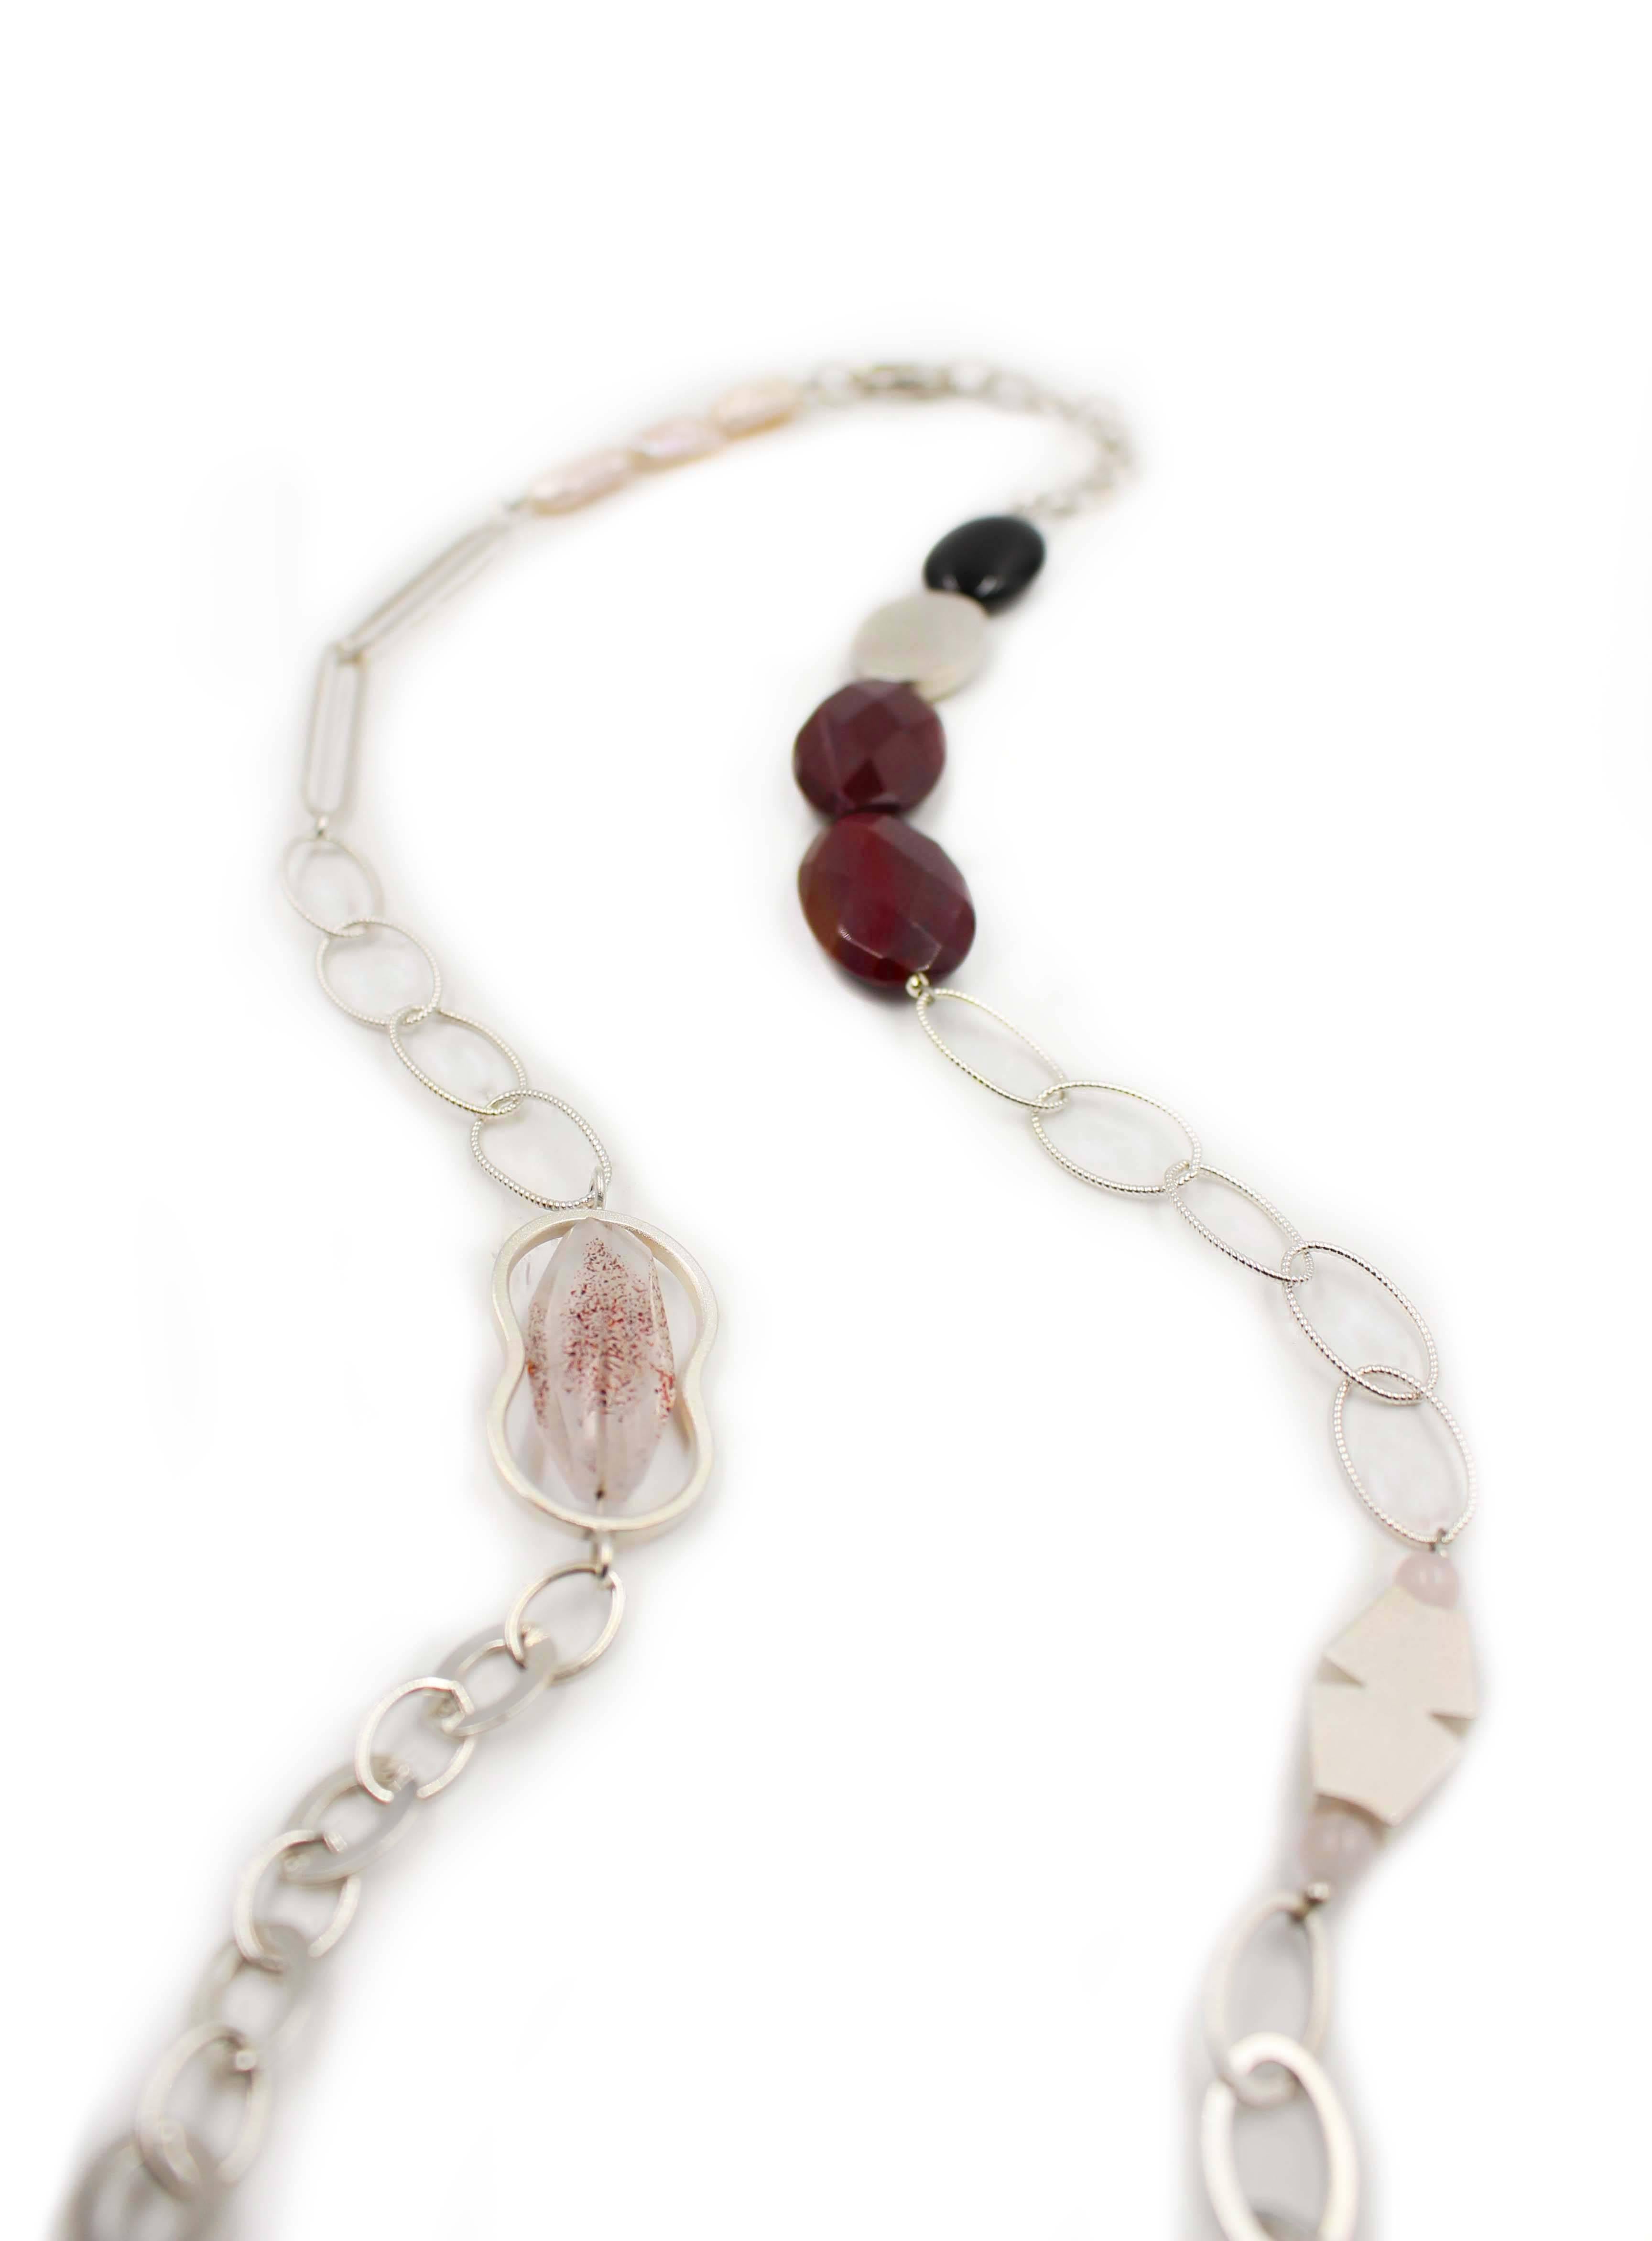 The Cranberry Garnet & Sterling Silver Necklace features handmade sterling silverloops, beads and chain set with a delightful array of gemstones including garnet, agate, onyx, pearl, and rutilated strawberry quartz.

In 1975 Janis Kerman had